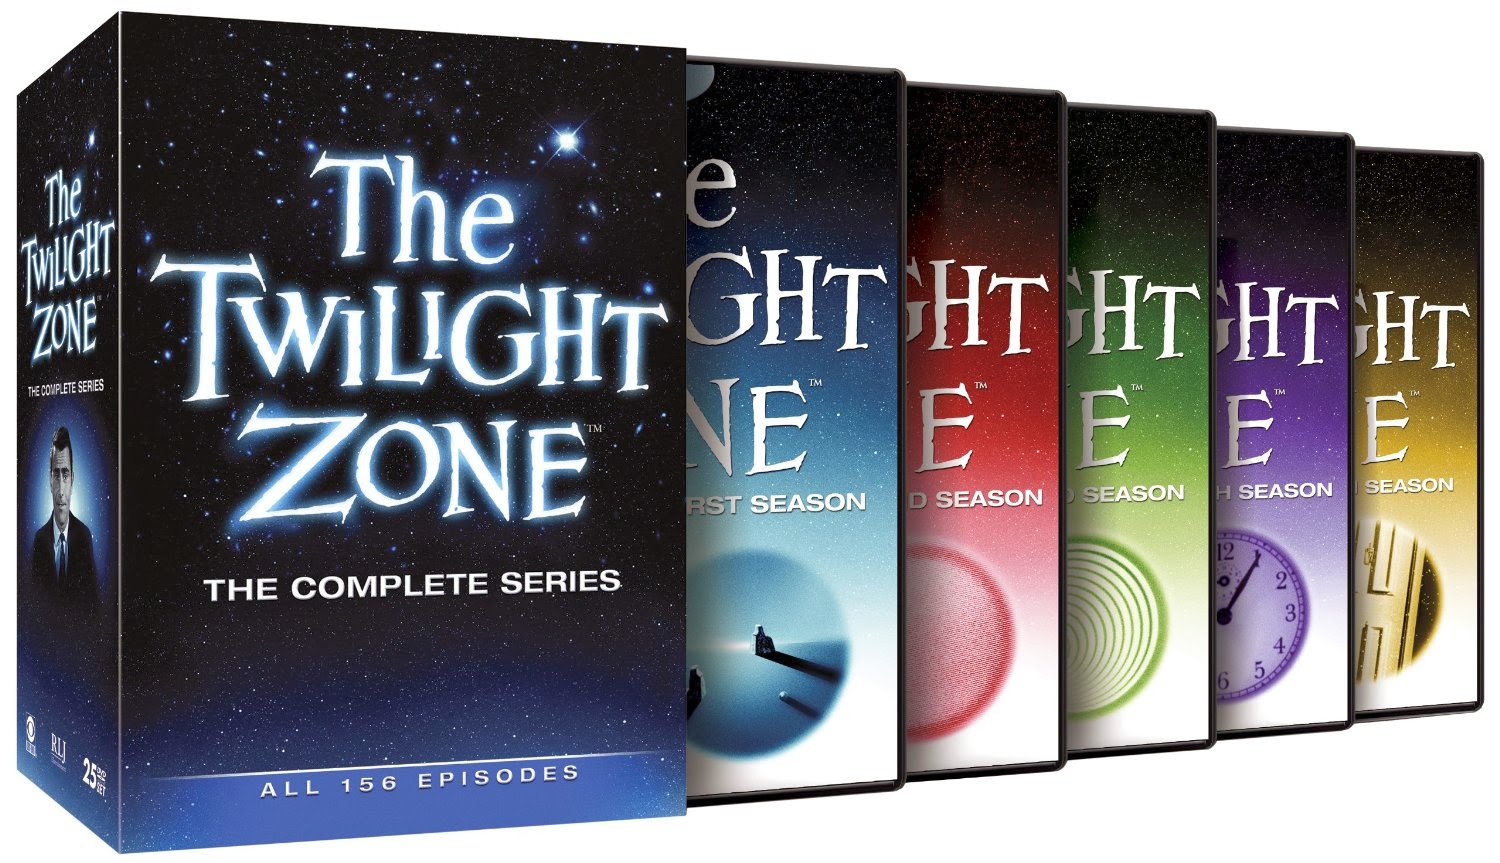 THE TWILIGHT ZONE: THE COMPLETE SERIES [Blu-ray] | GeorgeKelley.org